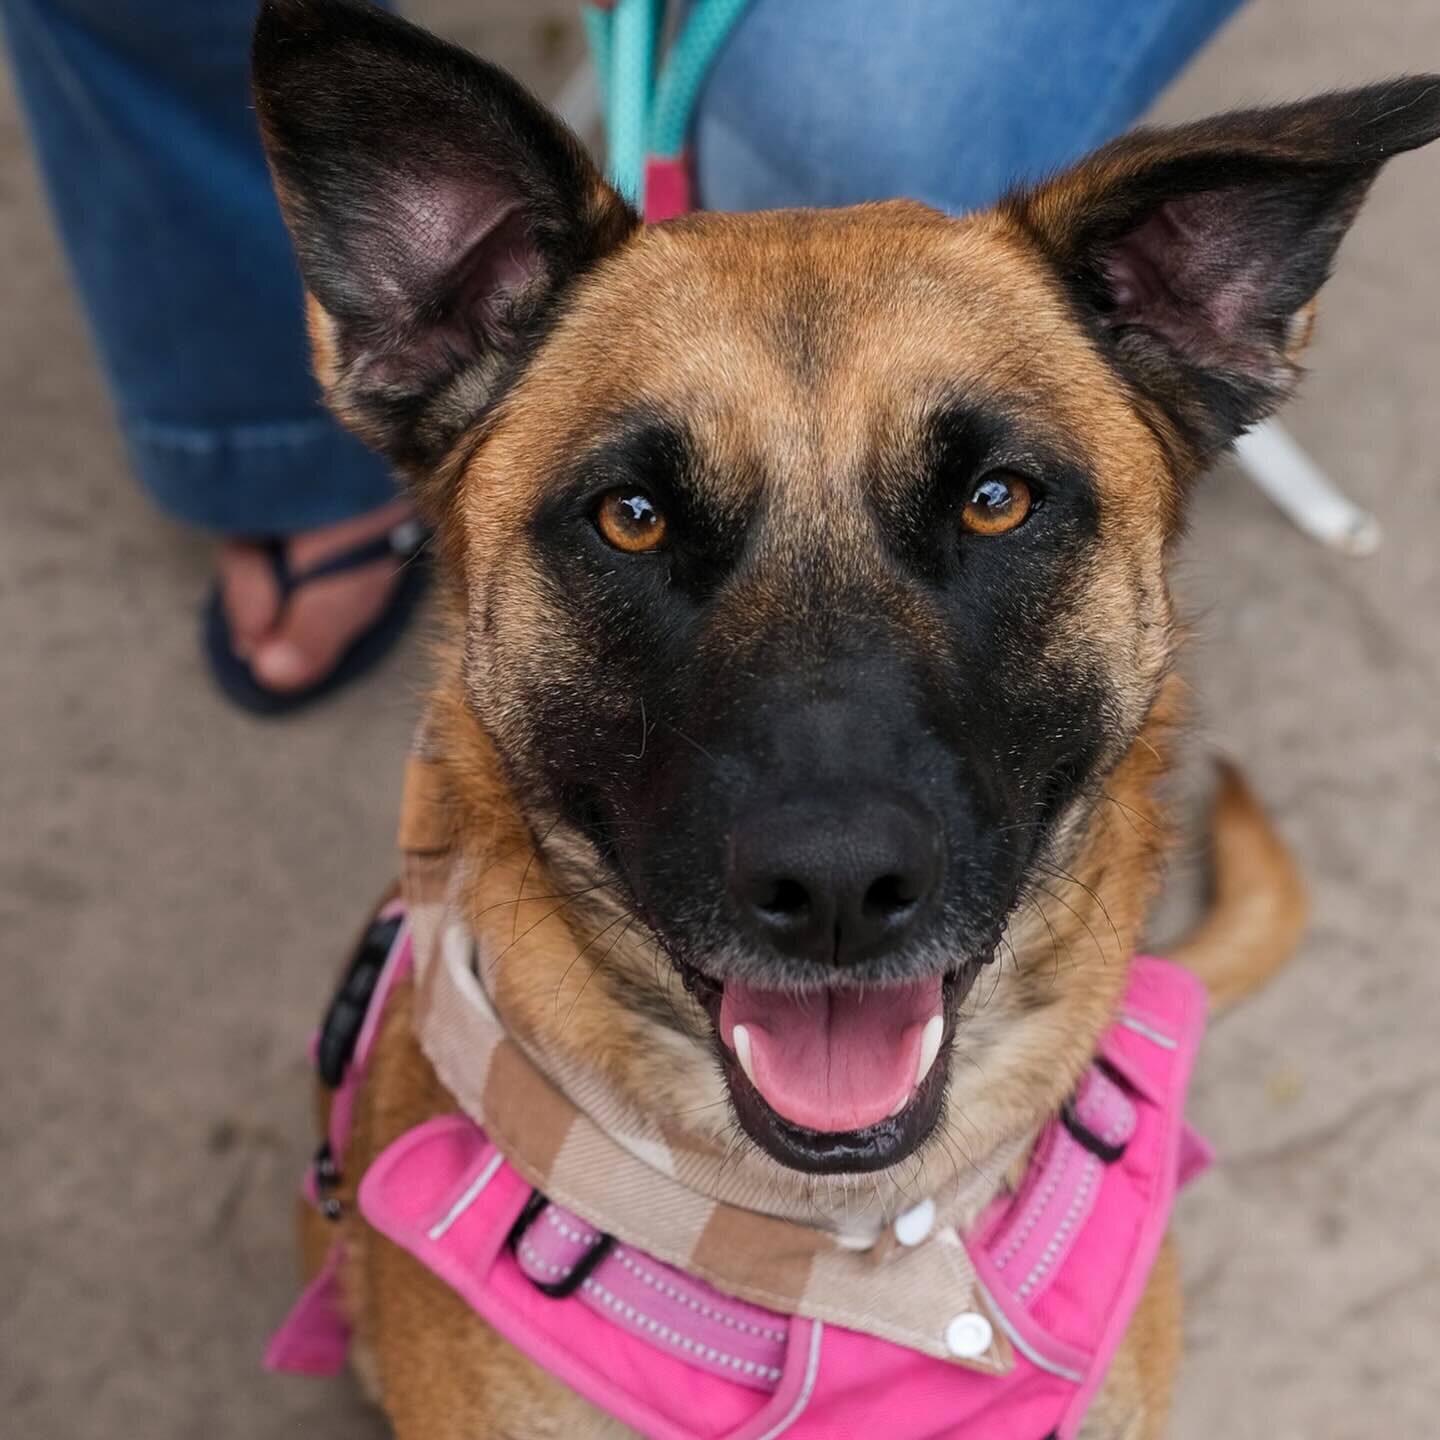 Hey, I&rsquo;m Stella, a 2-year-old Belgian Malinois Mix weighing a solid 50 pounds. Spayed, fully vaccinated, and fully potty trained &ndash; yep, I&rsquo;ve got it all together.

My story involves a brief adoption stint, but now I&rsquo;m back and 